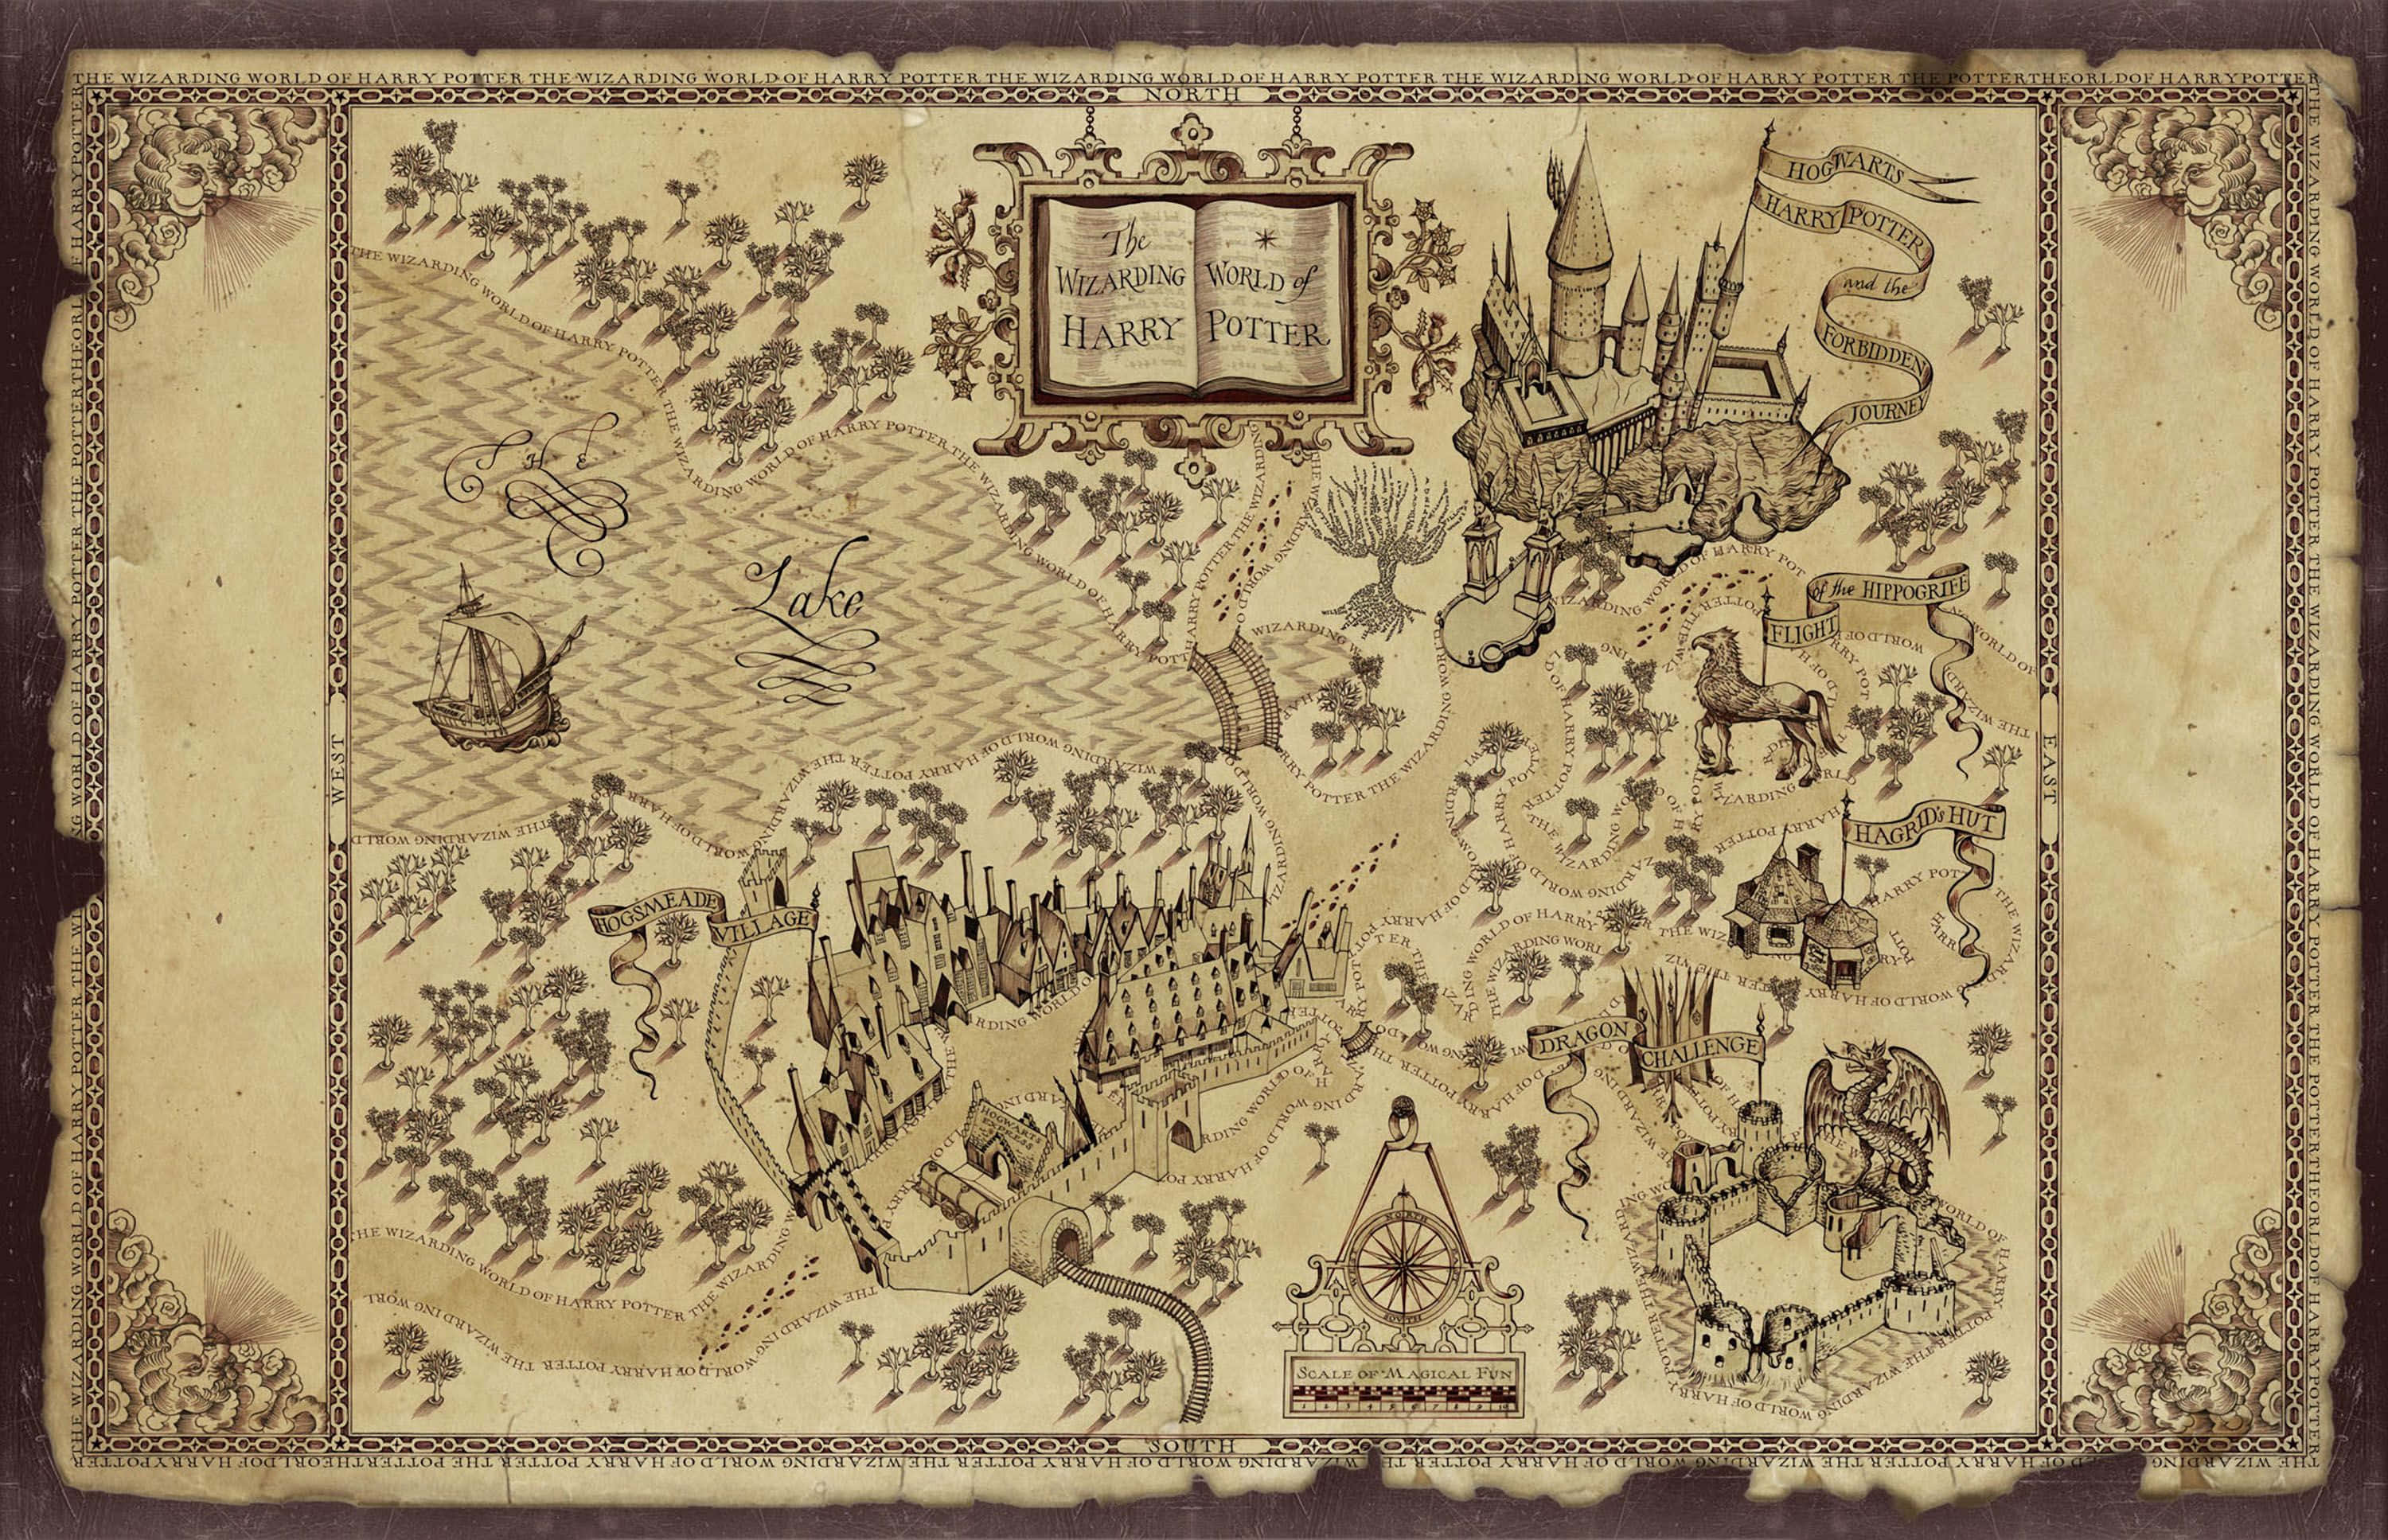 "Step beyond the magical bounds of Hogwarts and explore the Marauder's Map" Wallpaper